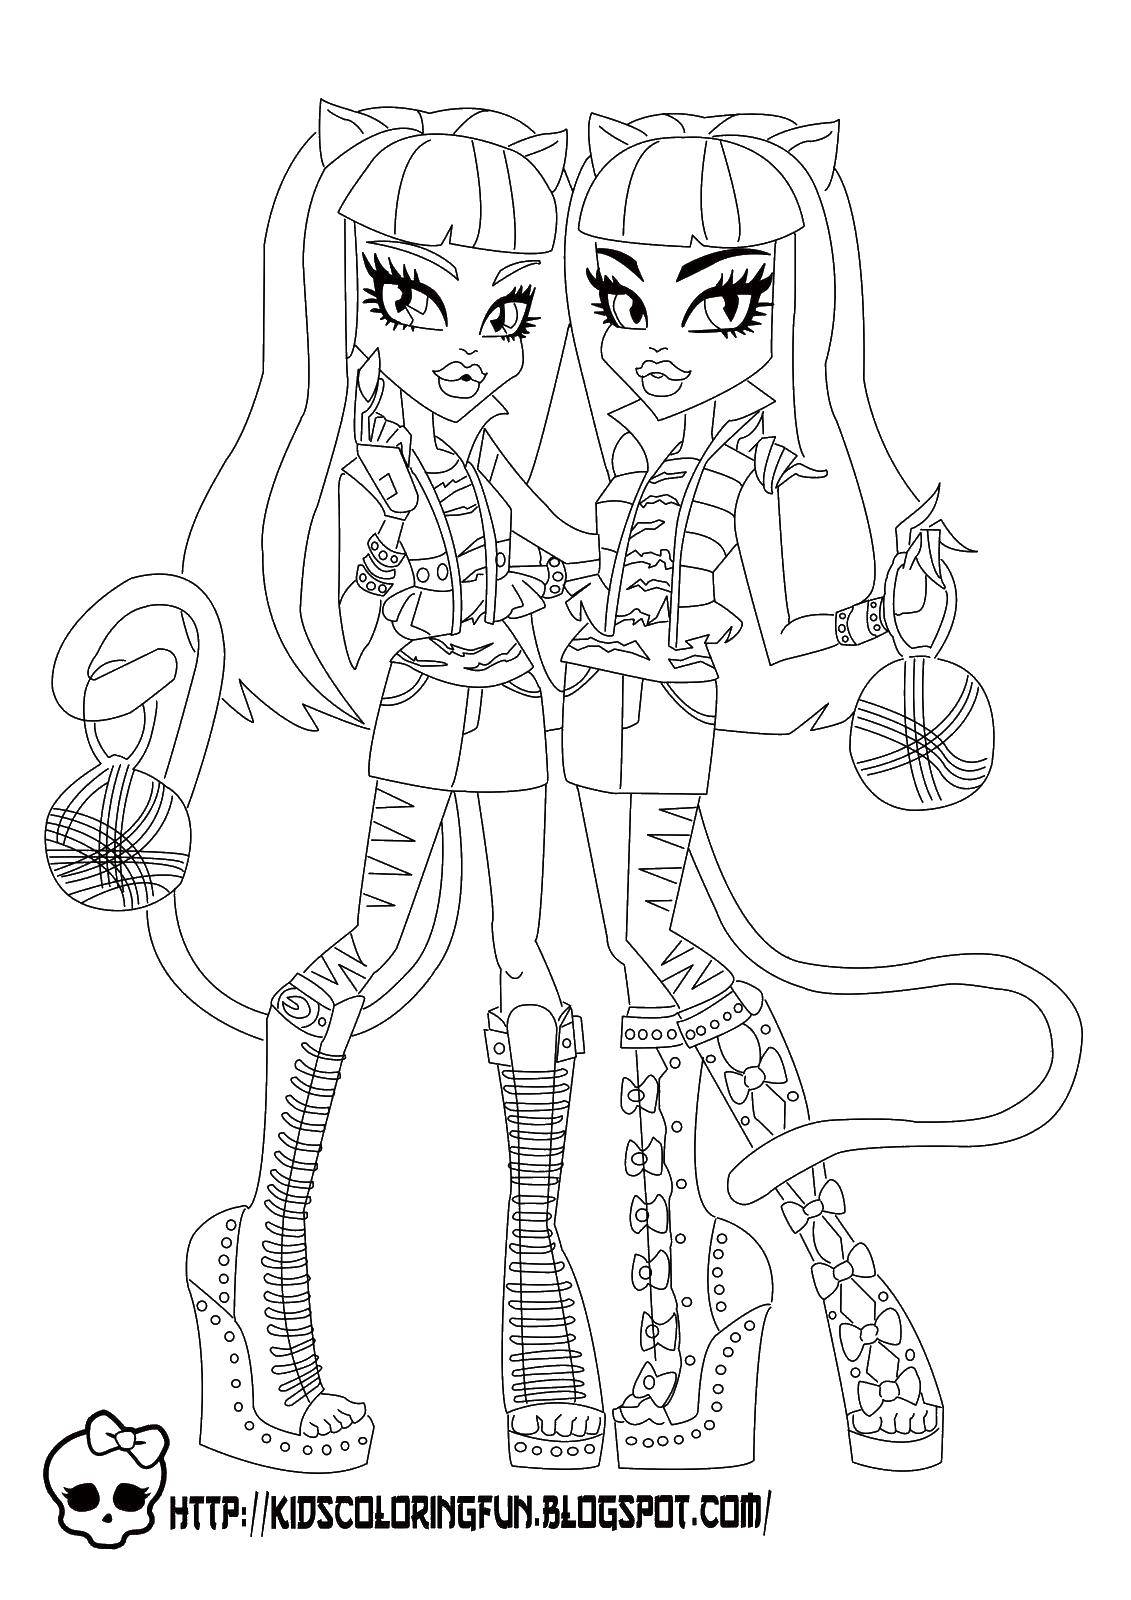 Coloring The twins from monster high. Category Monster high. Tags:  girls cats, balls.